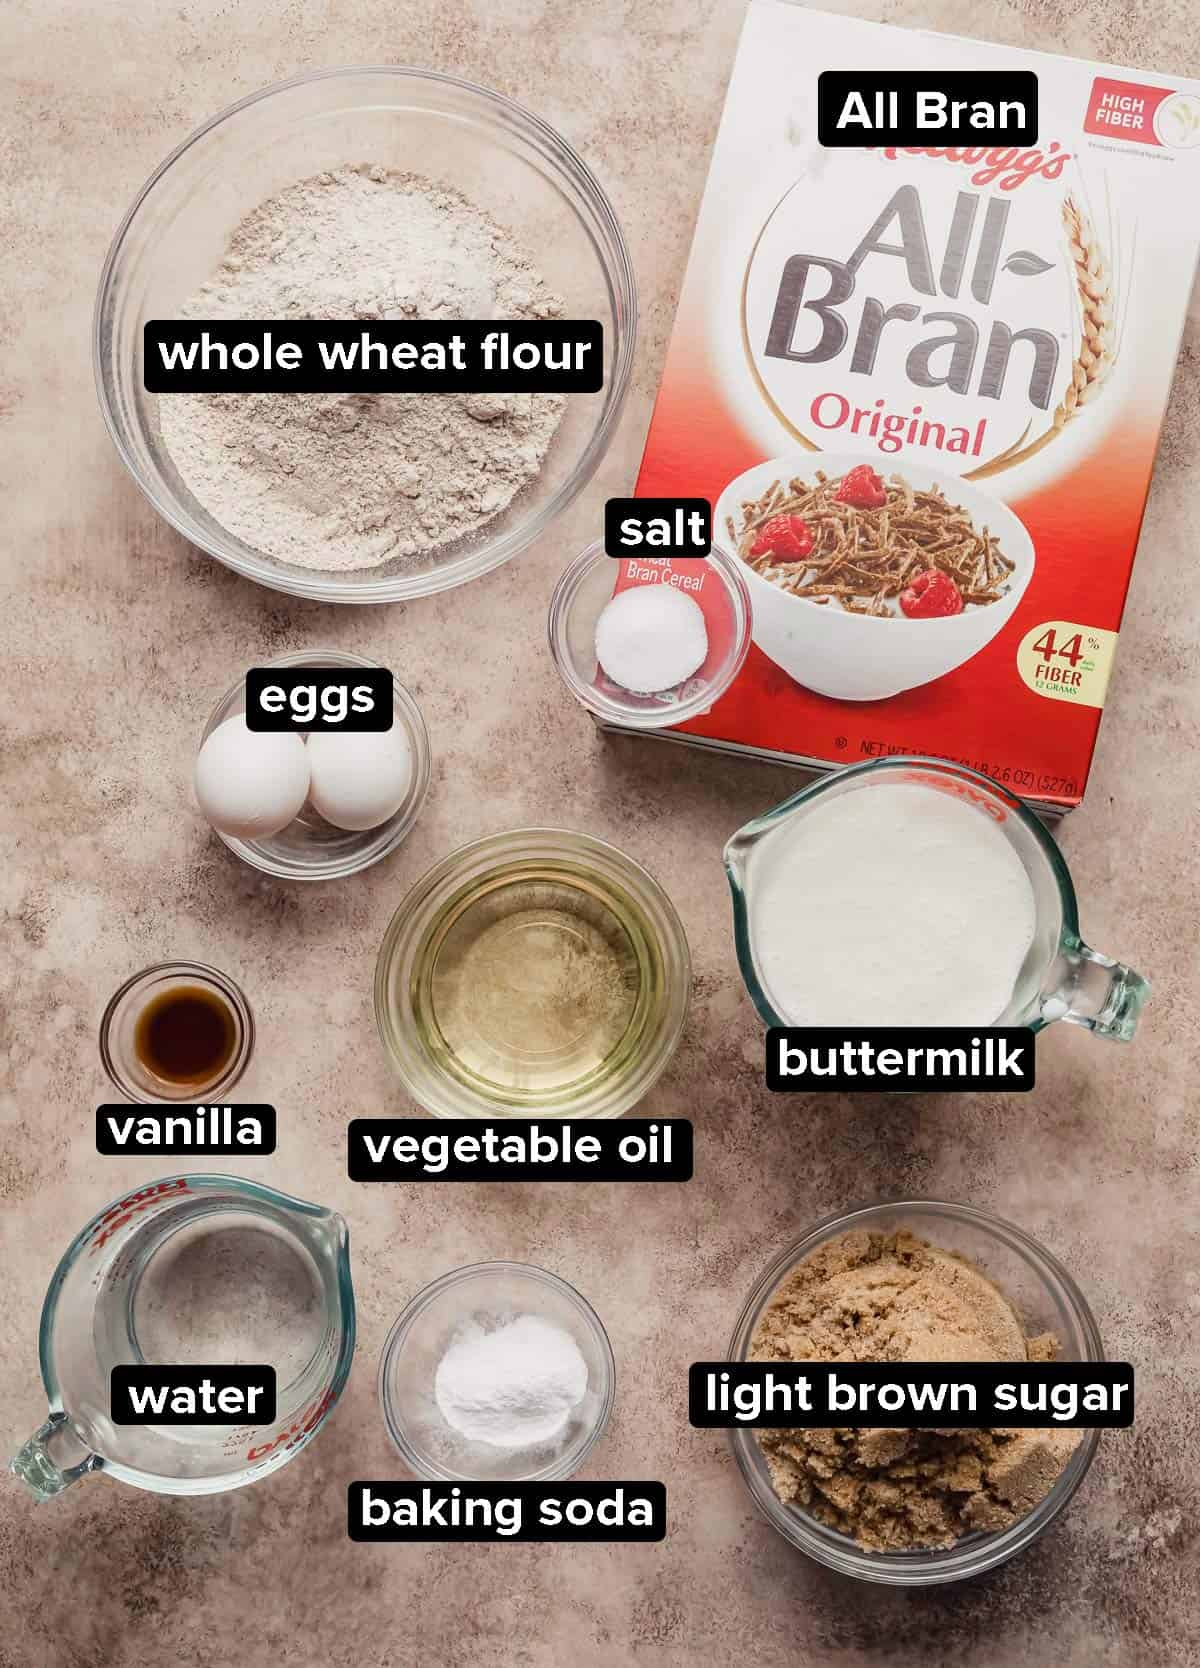 All Bran Muffins ingredients portioned into glass bowls on a beige textured background.